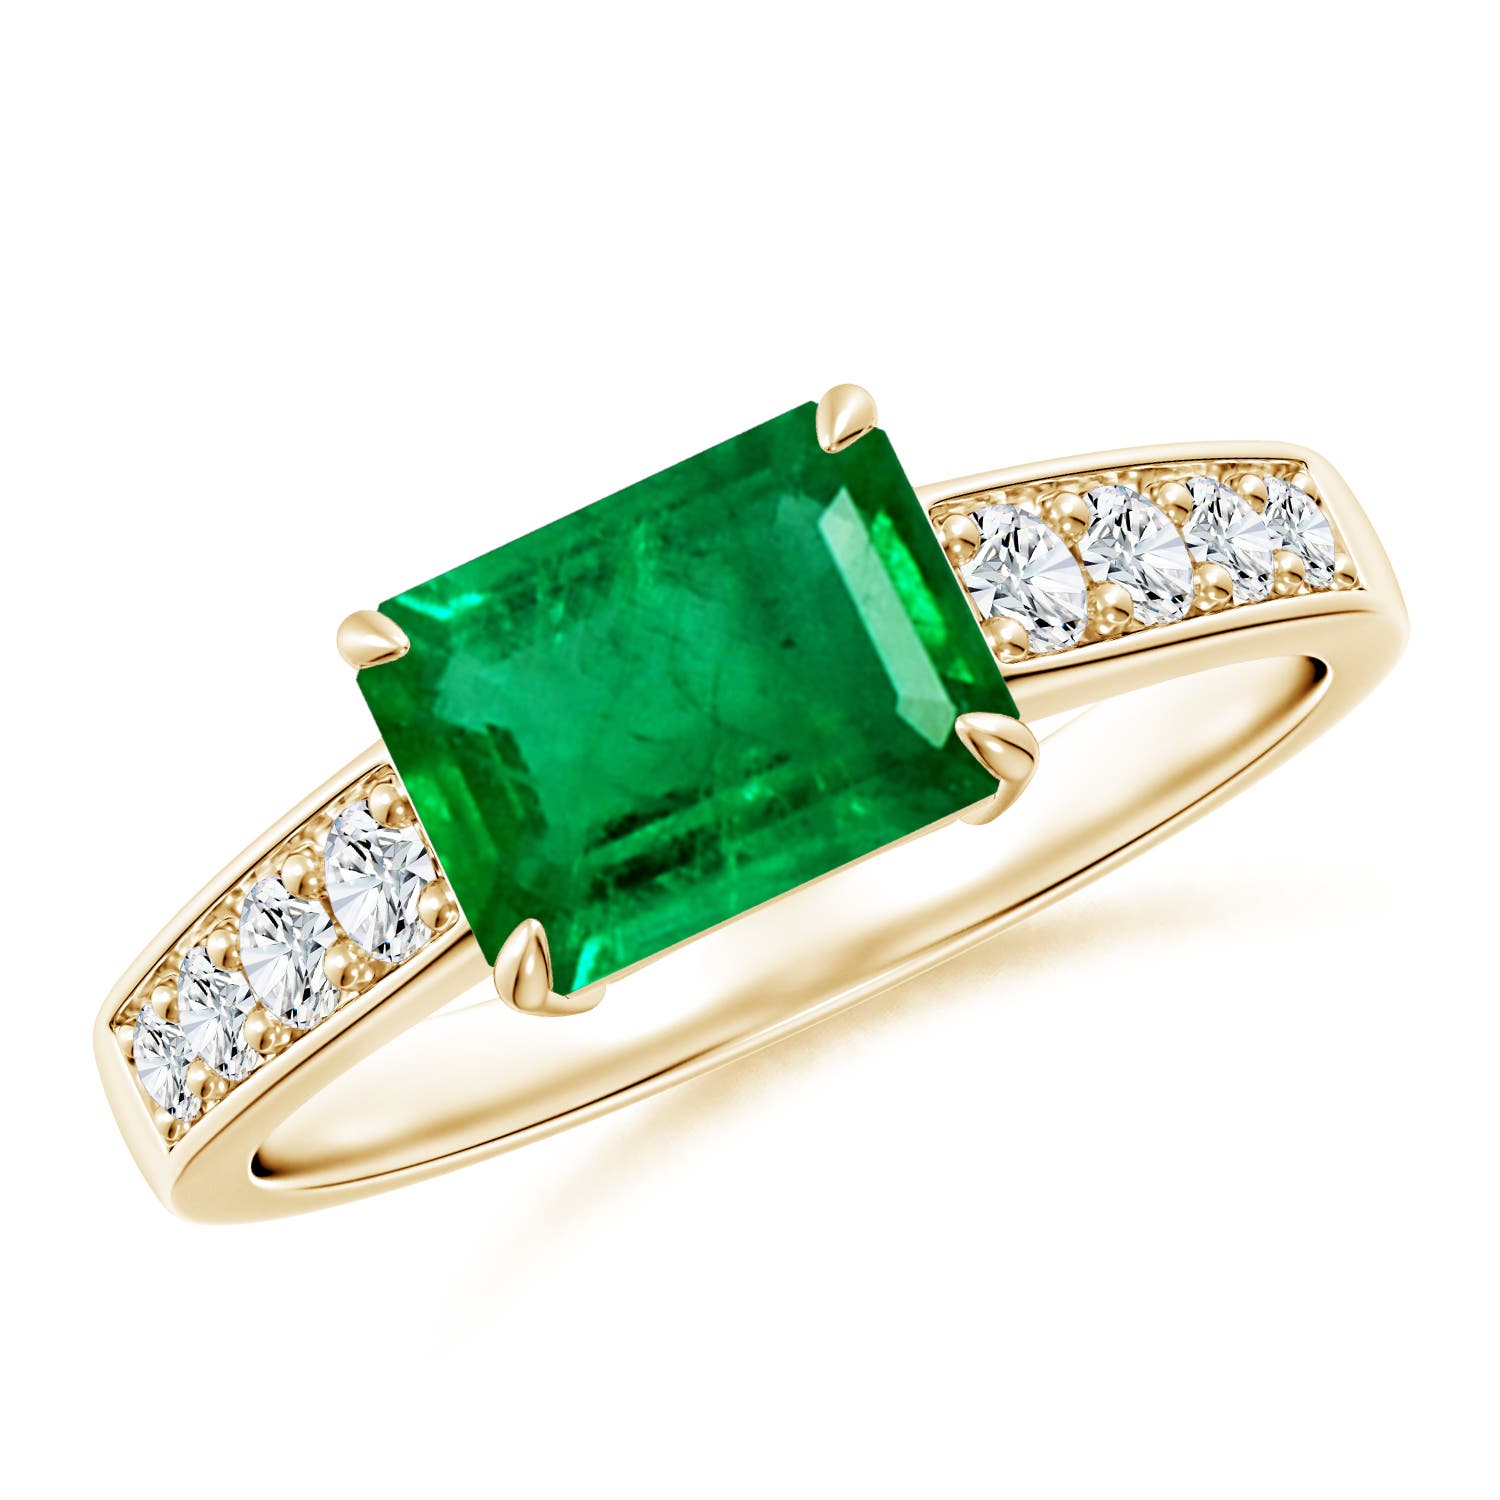 AAA - Emerald / 1.82 CT / 14 KT Yellow Gold